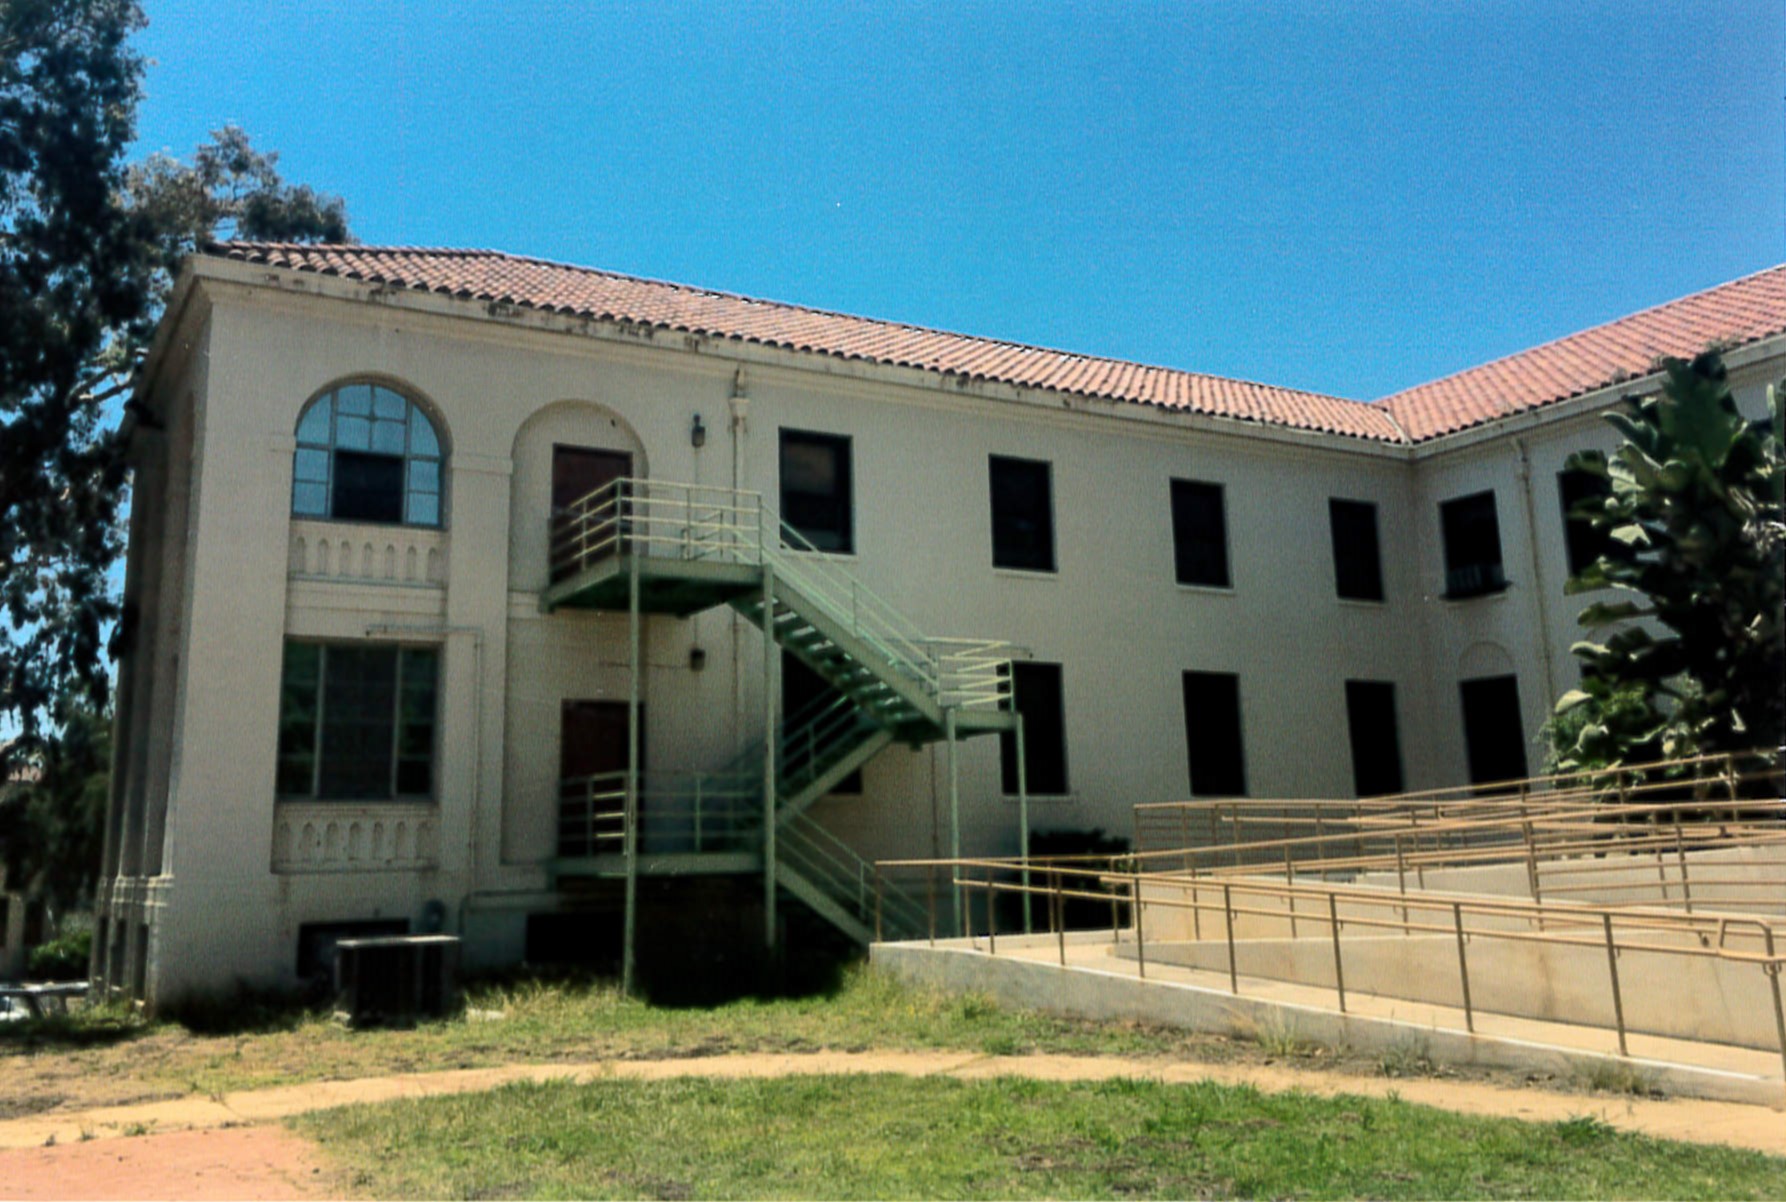 South wing of Building 205